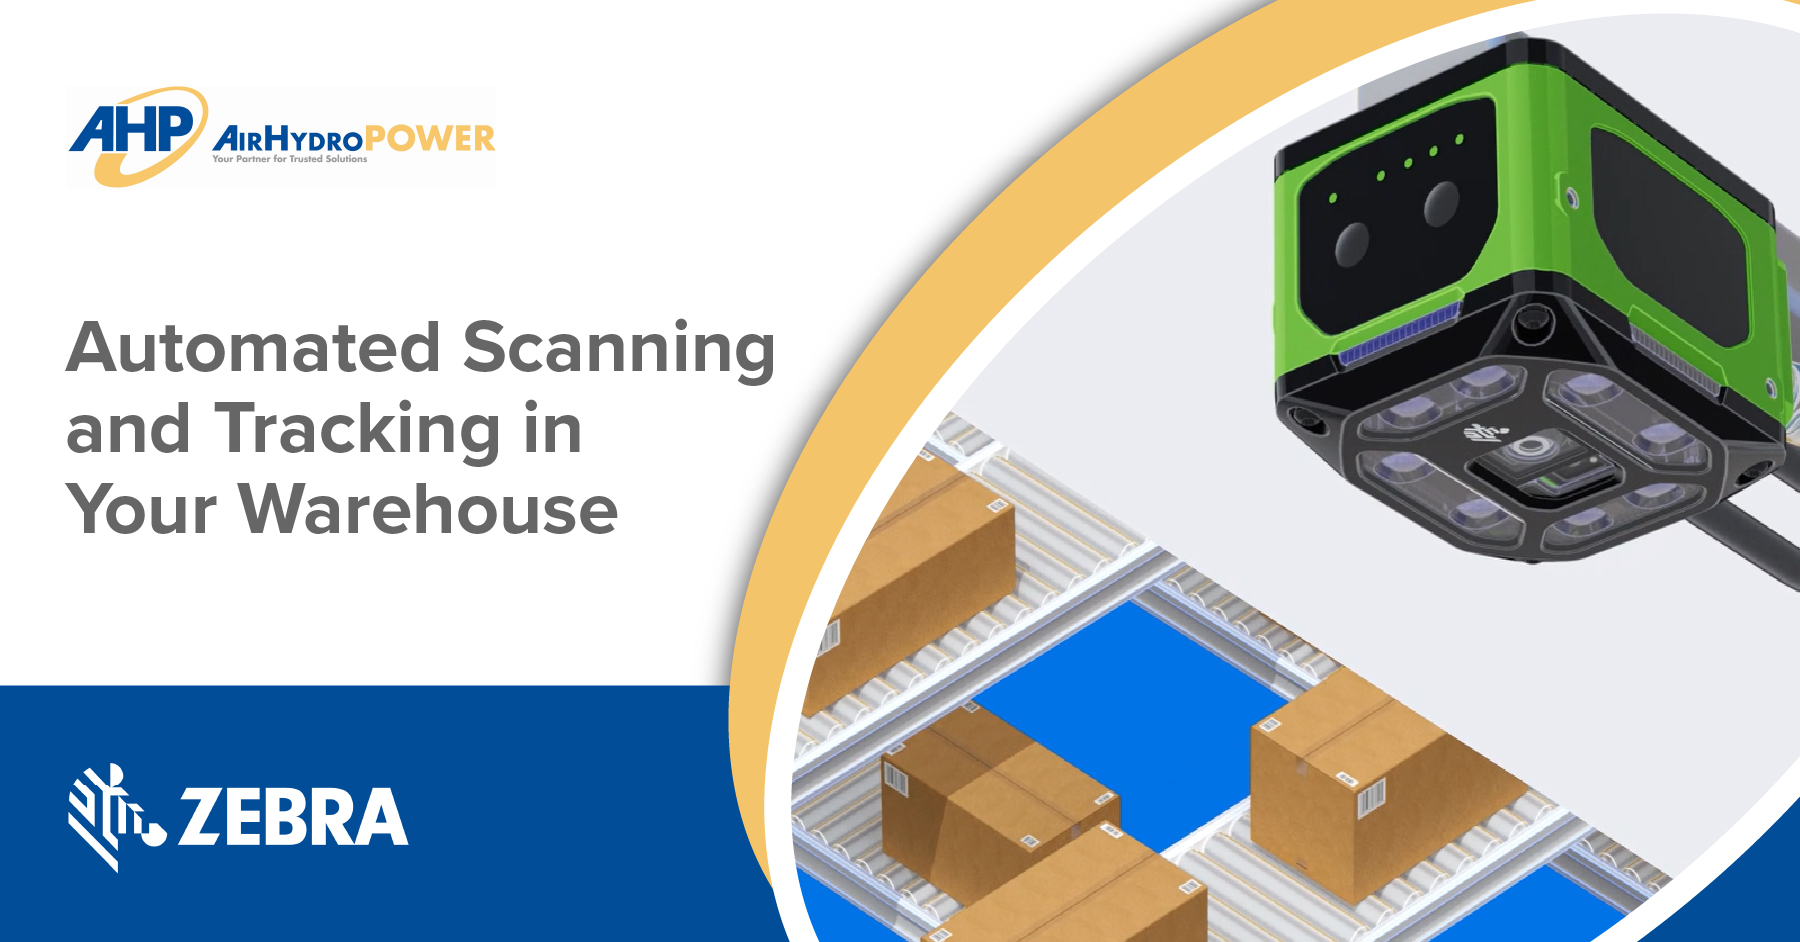 Zebra Machine Vision Solutions for Warehouse and Logistics